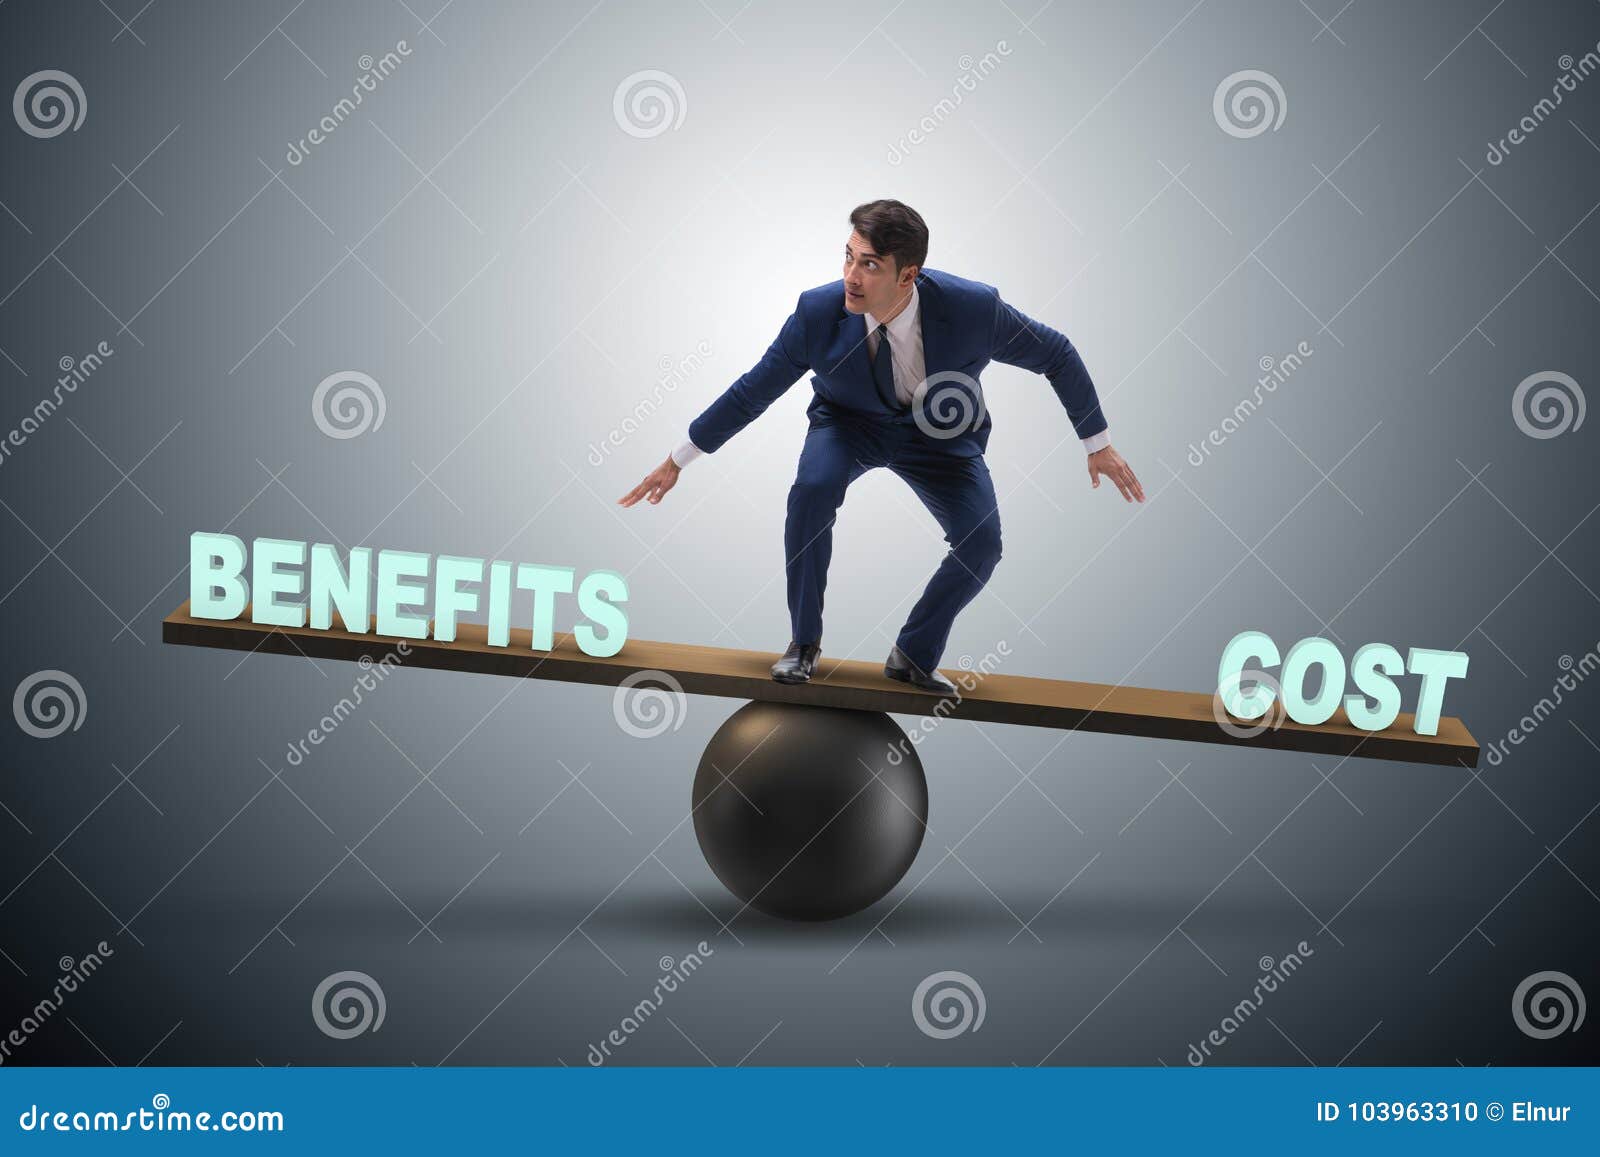 businessman balancing between cost and benefit in business conce